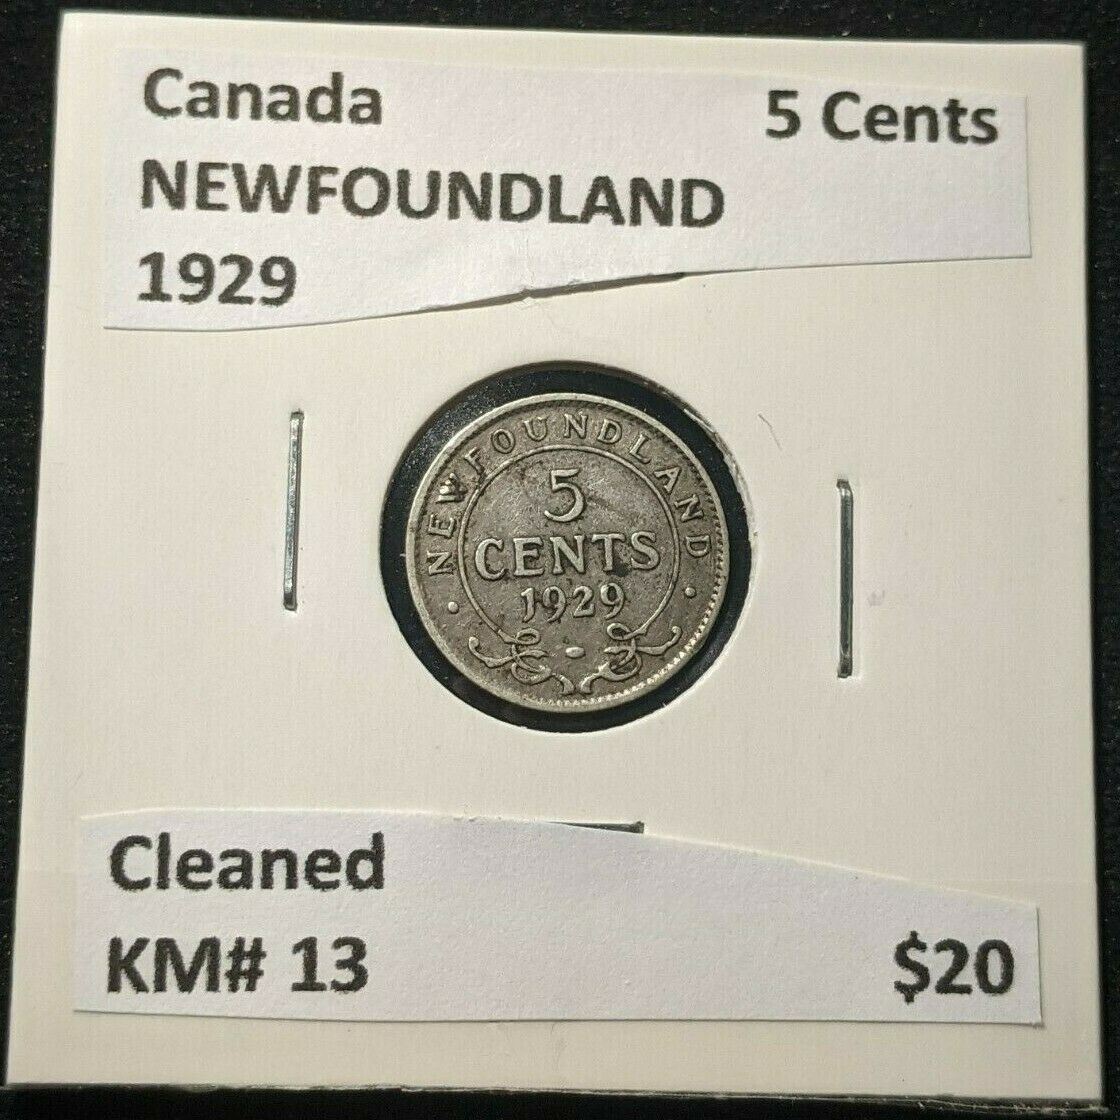 Canada NEWFOUNDLAND 1929 5 Cents KM# 13 Cleaned #1138